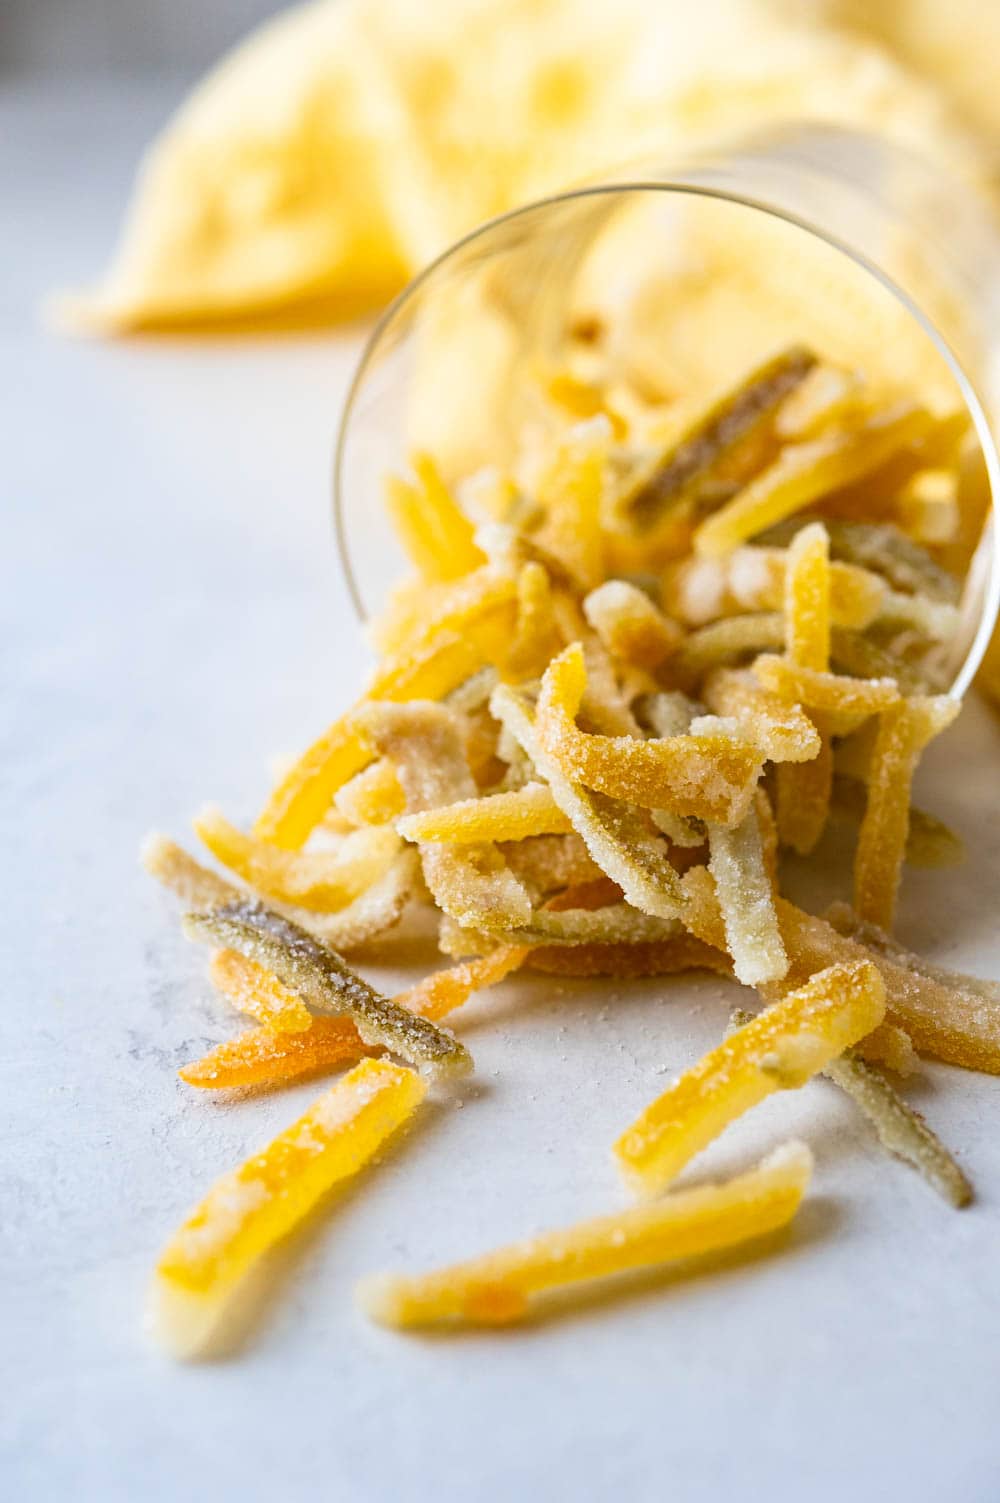 Candied lemon and lime peels.